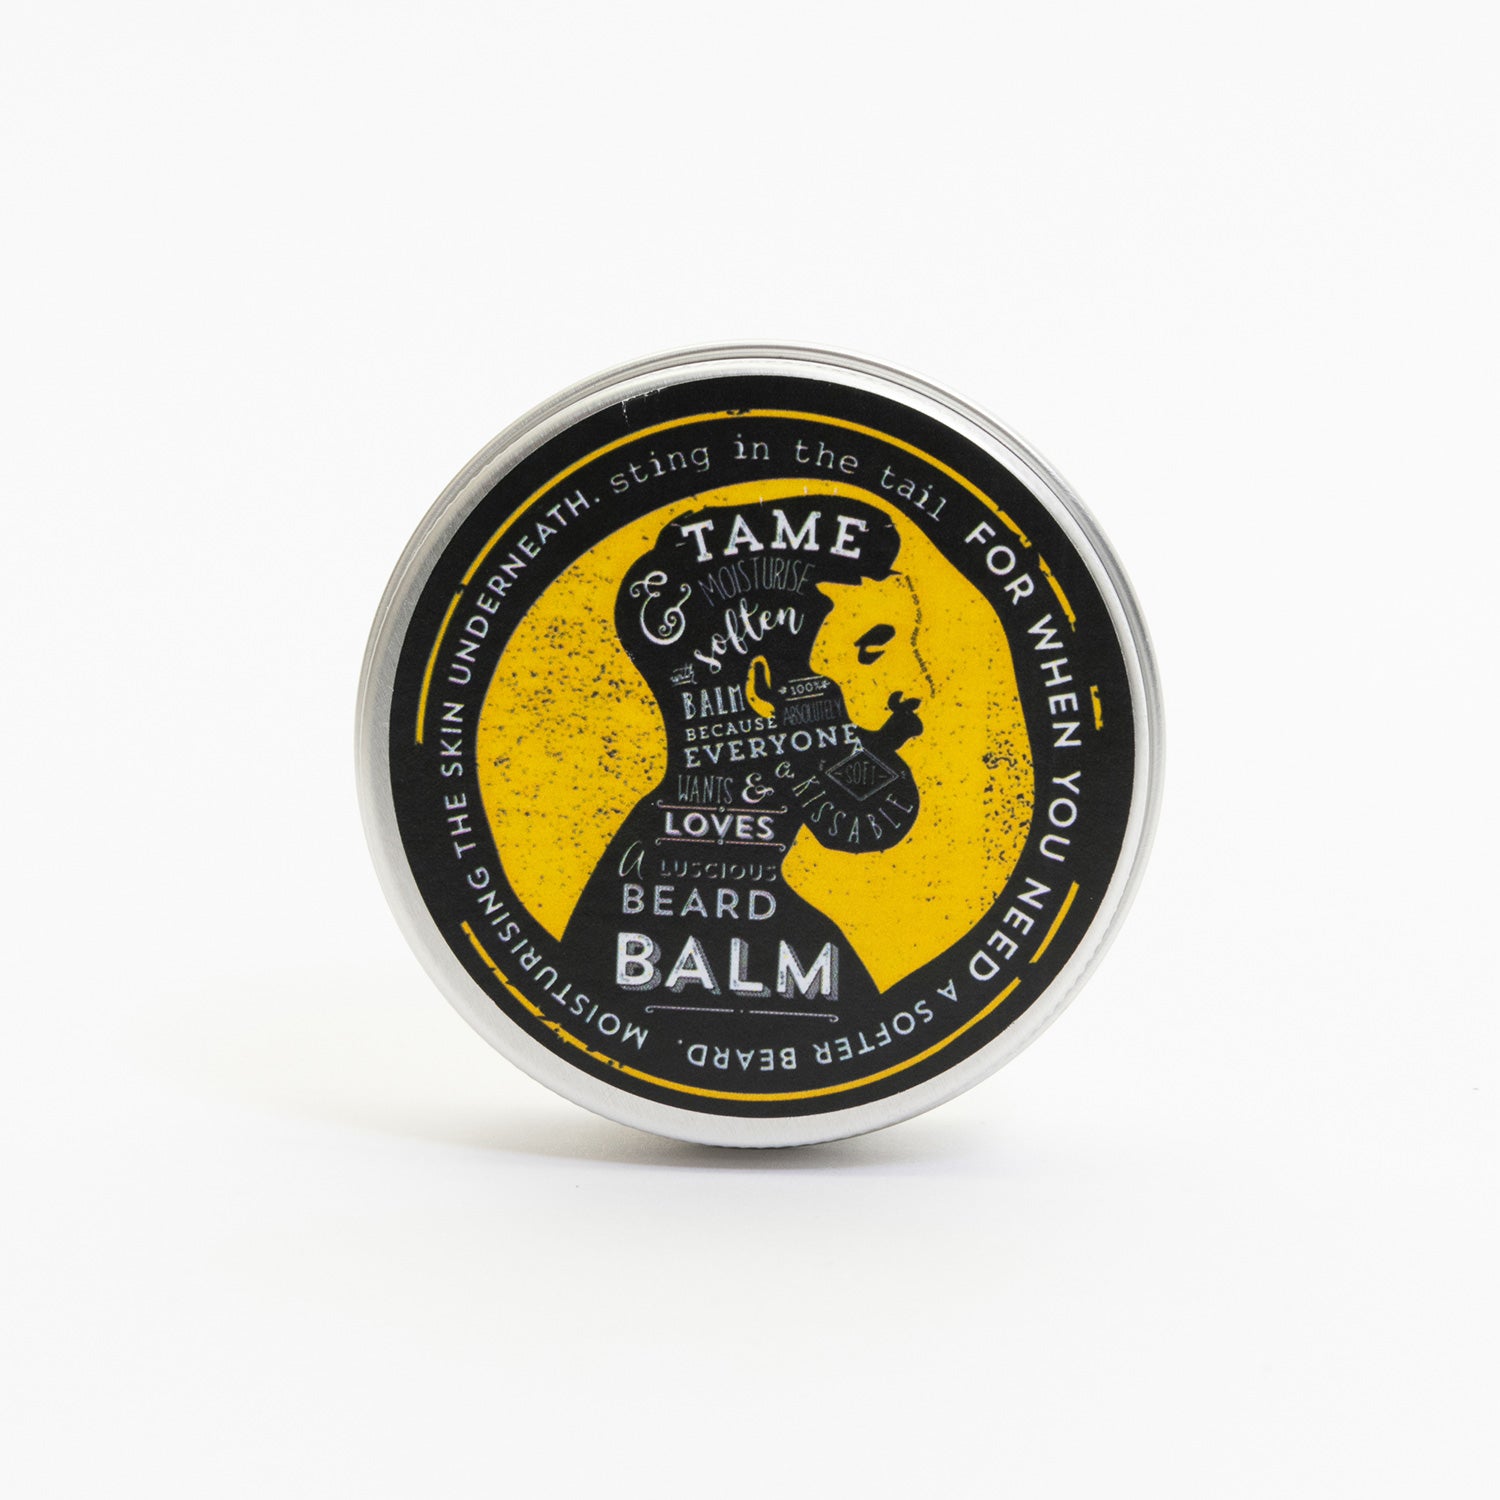 A tin of beard balm pictured on a white background. The tin has a yellow and black label featuring an illustration of a man in profile with a thick beard.